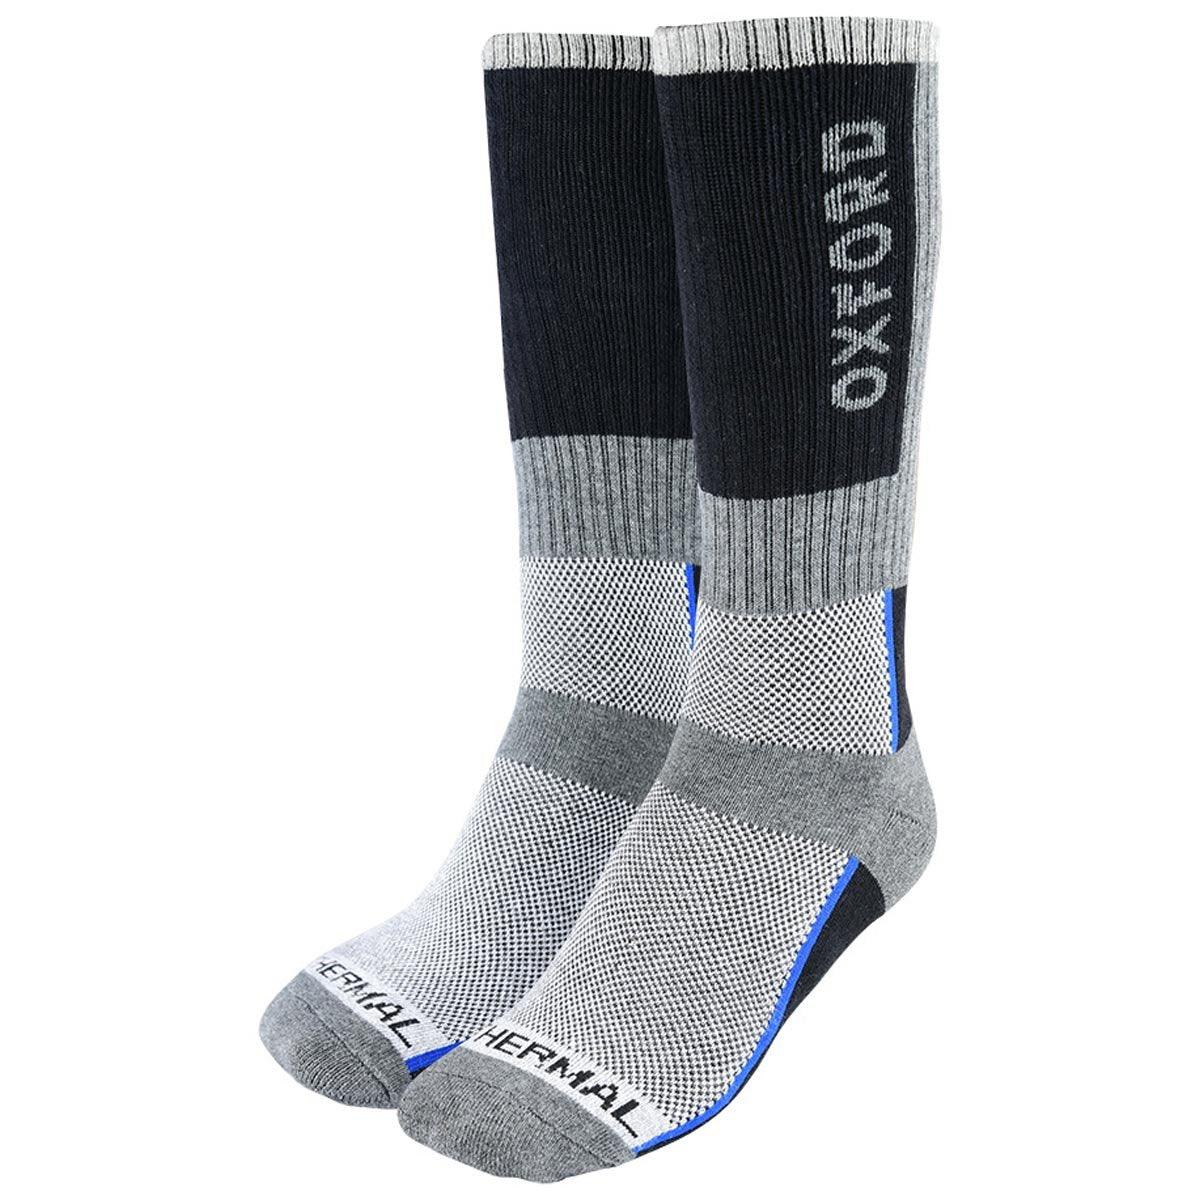 Oxford Thermal Oxsocks Regular Grey - "Love them...Good quality and fit perfect"